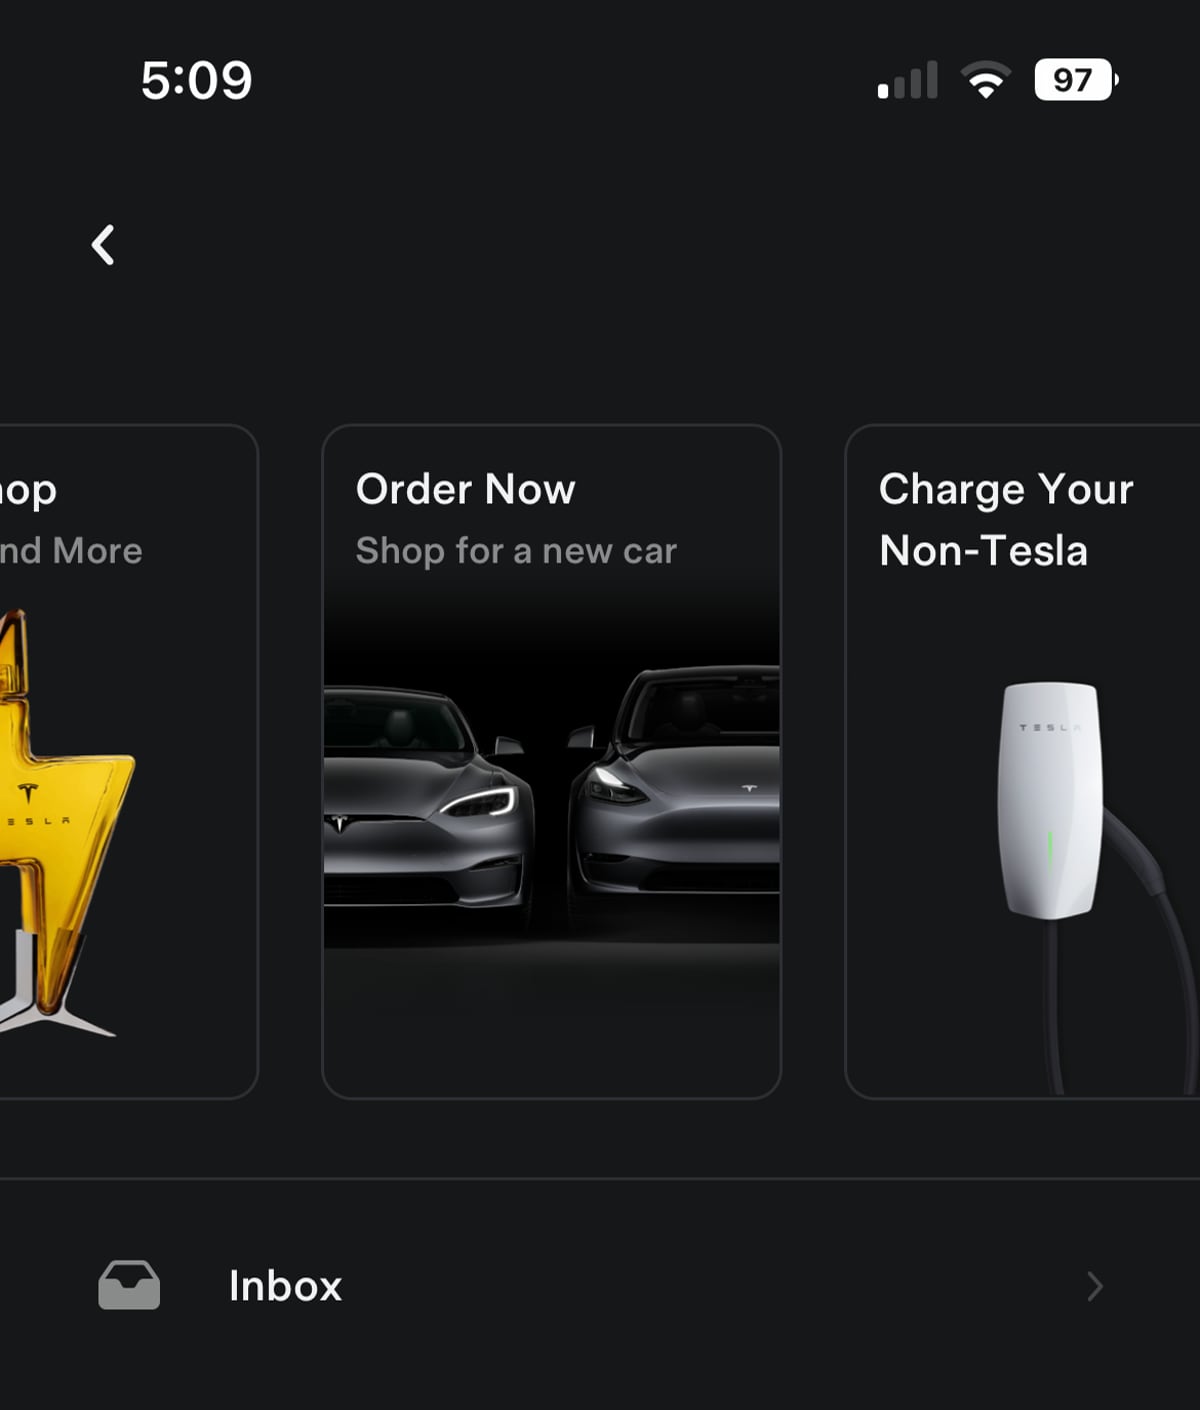 You can now buy a new Tesla directly from the Tesla app